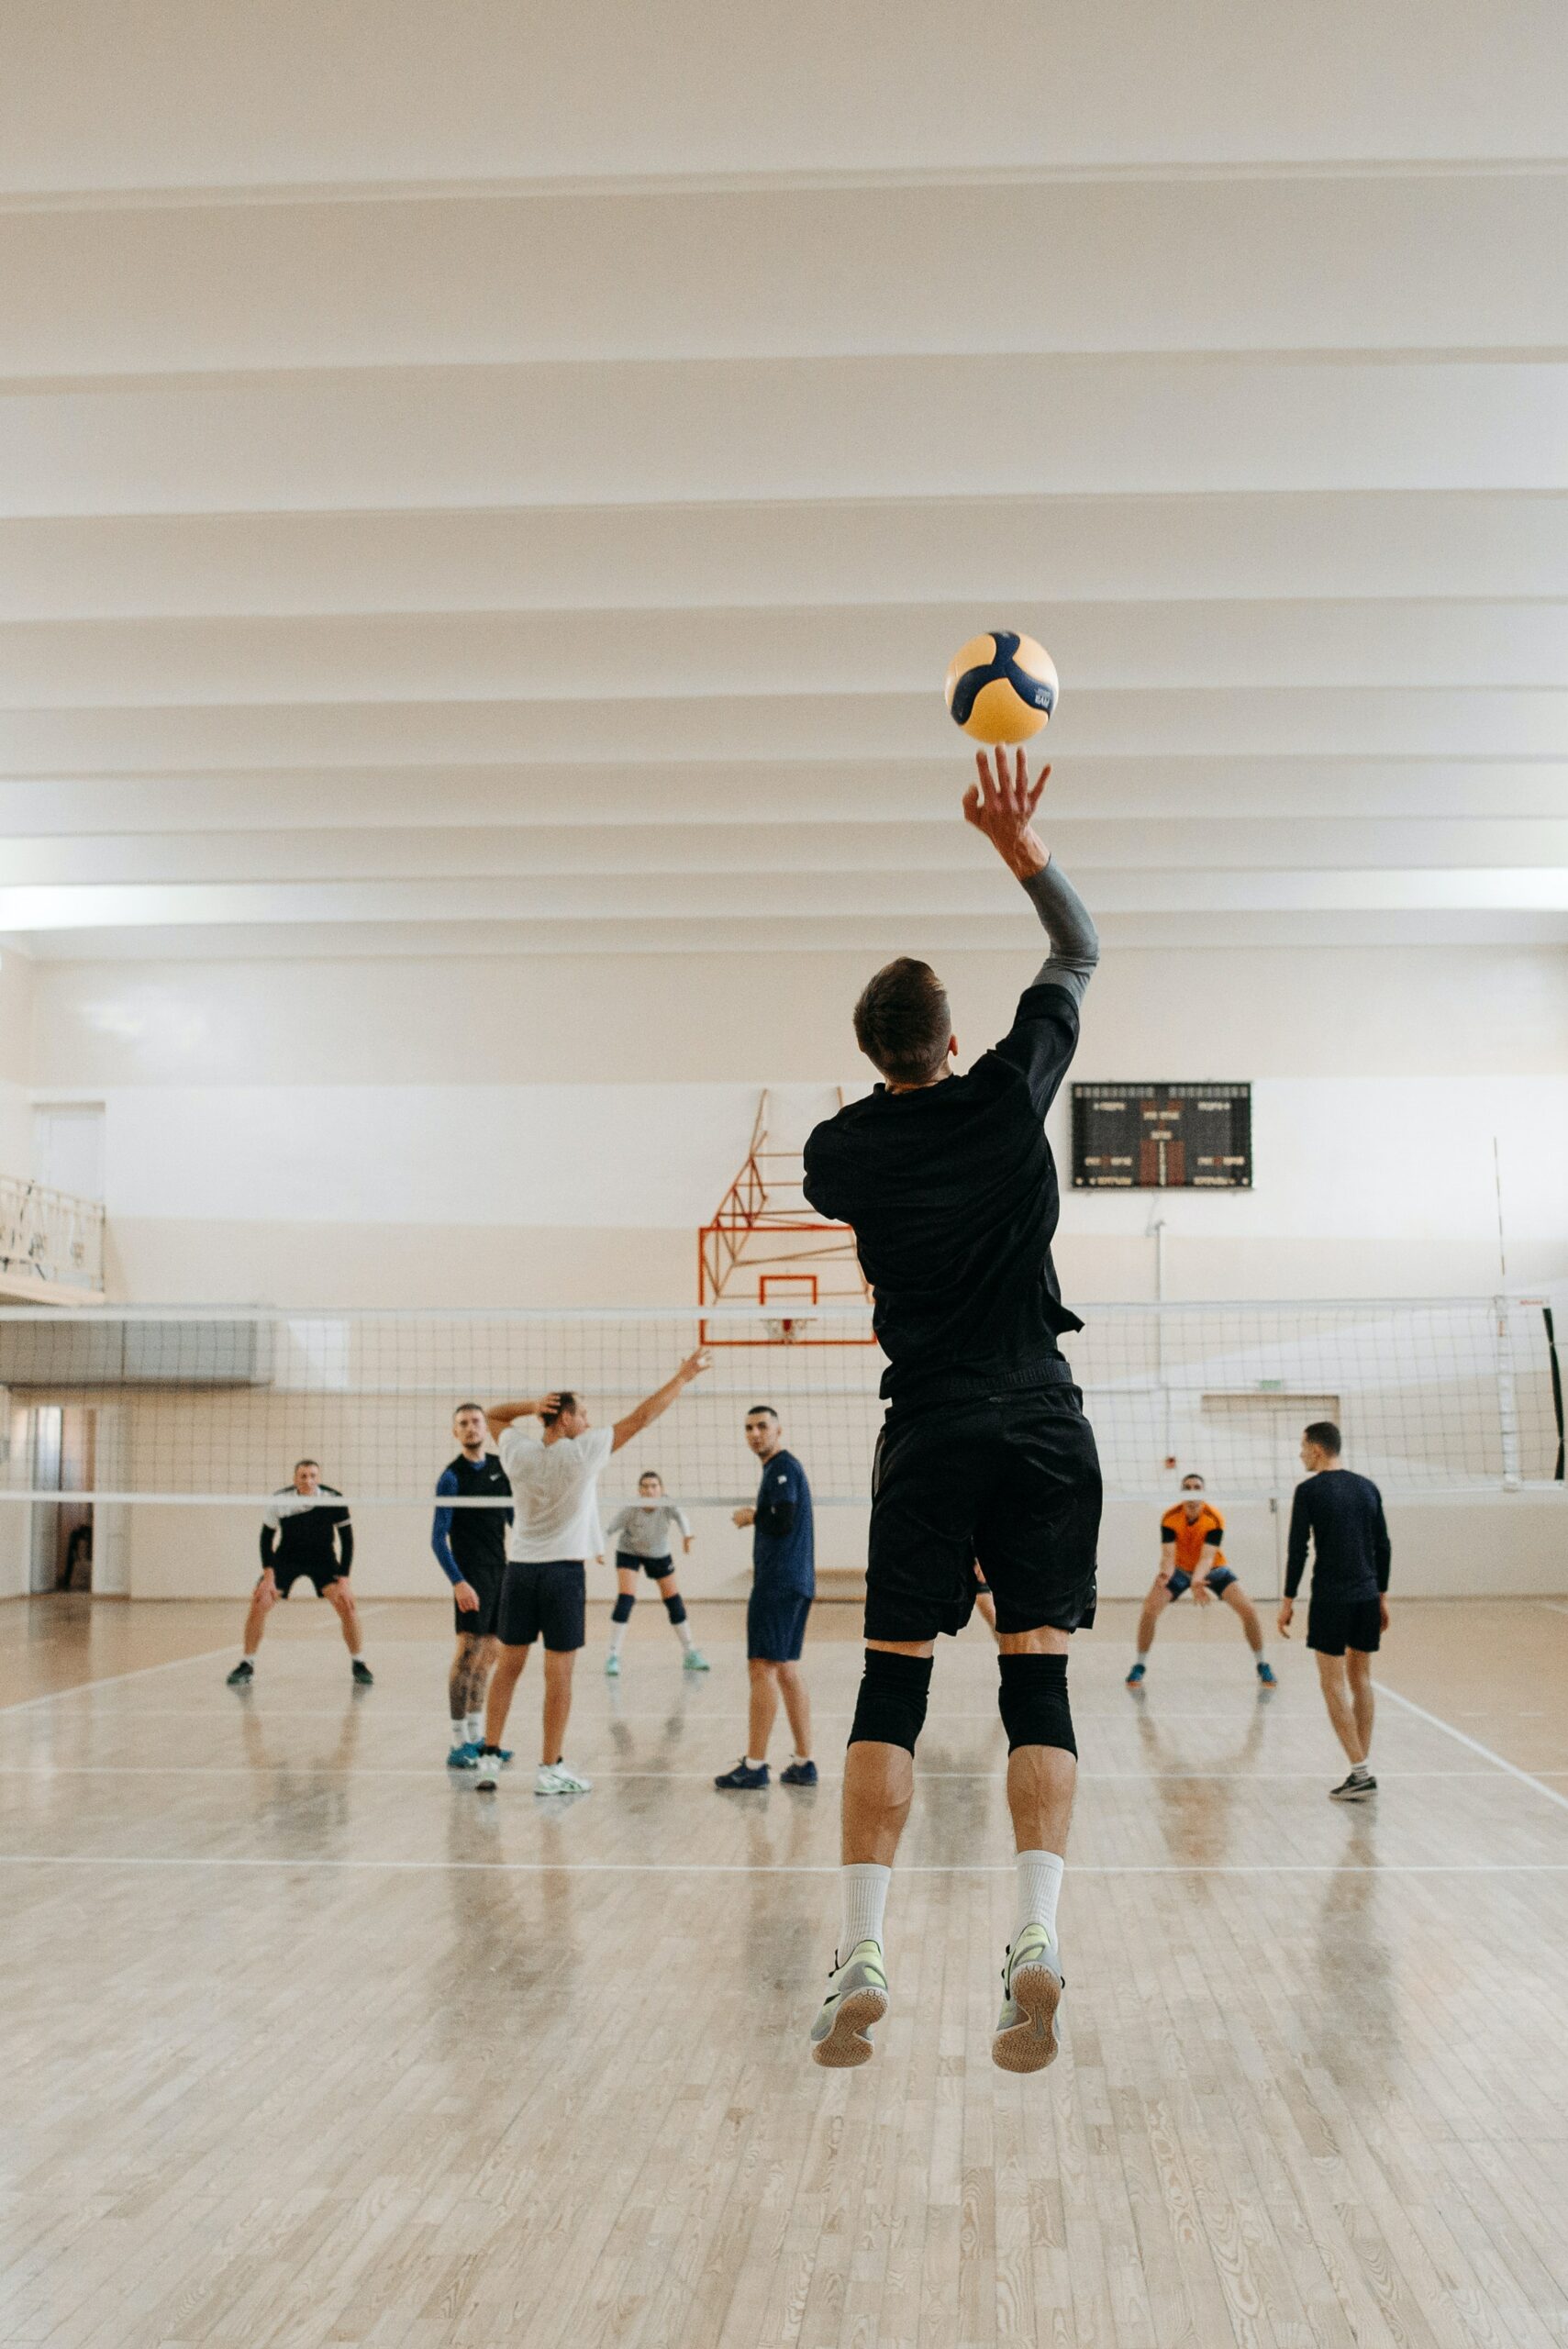 Elevate Your Volleyball Game with the Topspin Serve - Volleyball Vibe